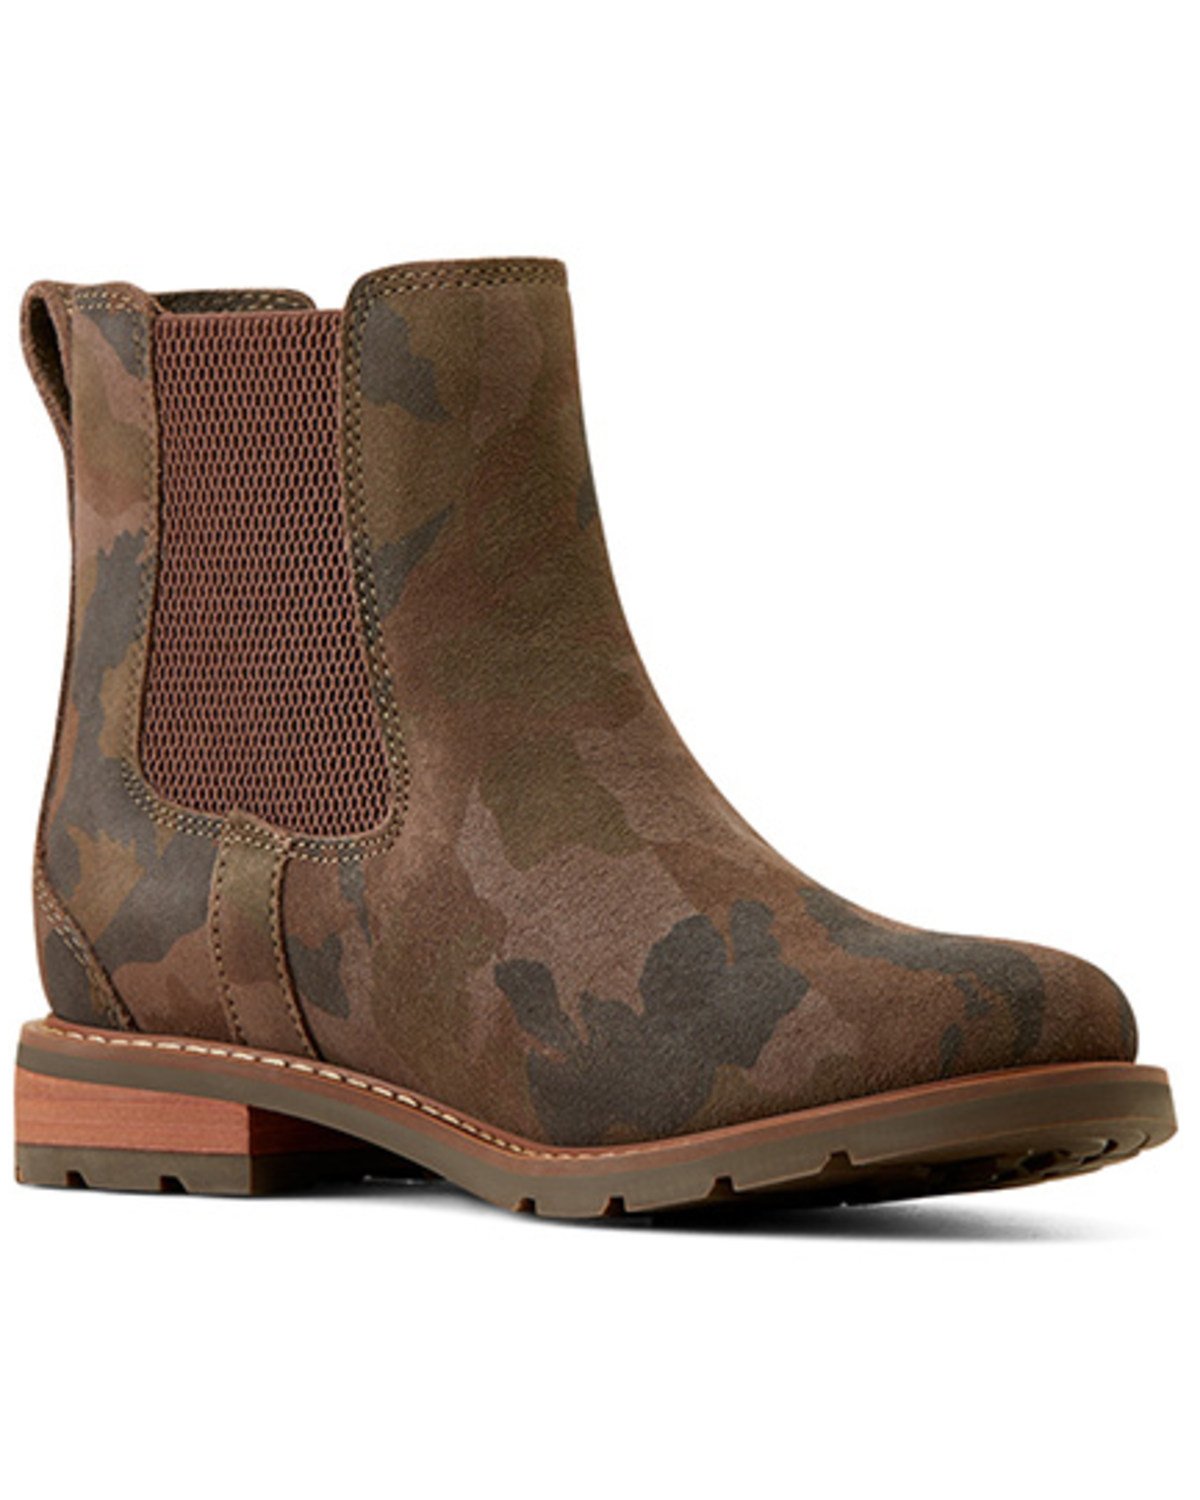 Ariat Women's Wexford Camo Print Boots - Round Toe